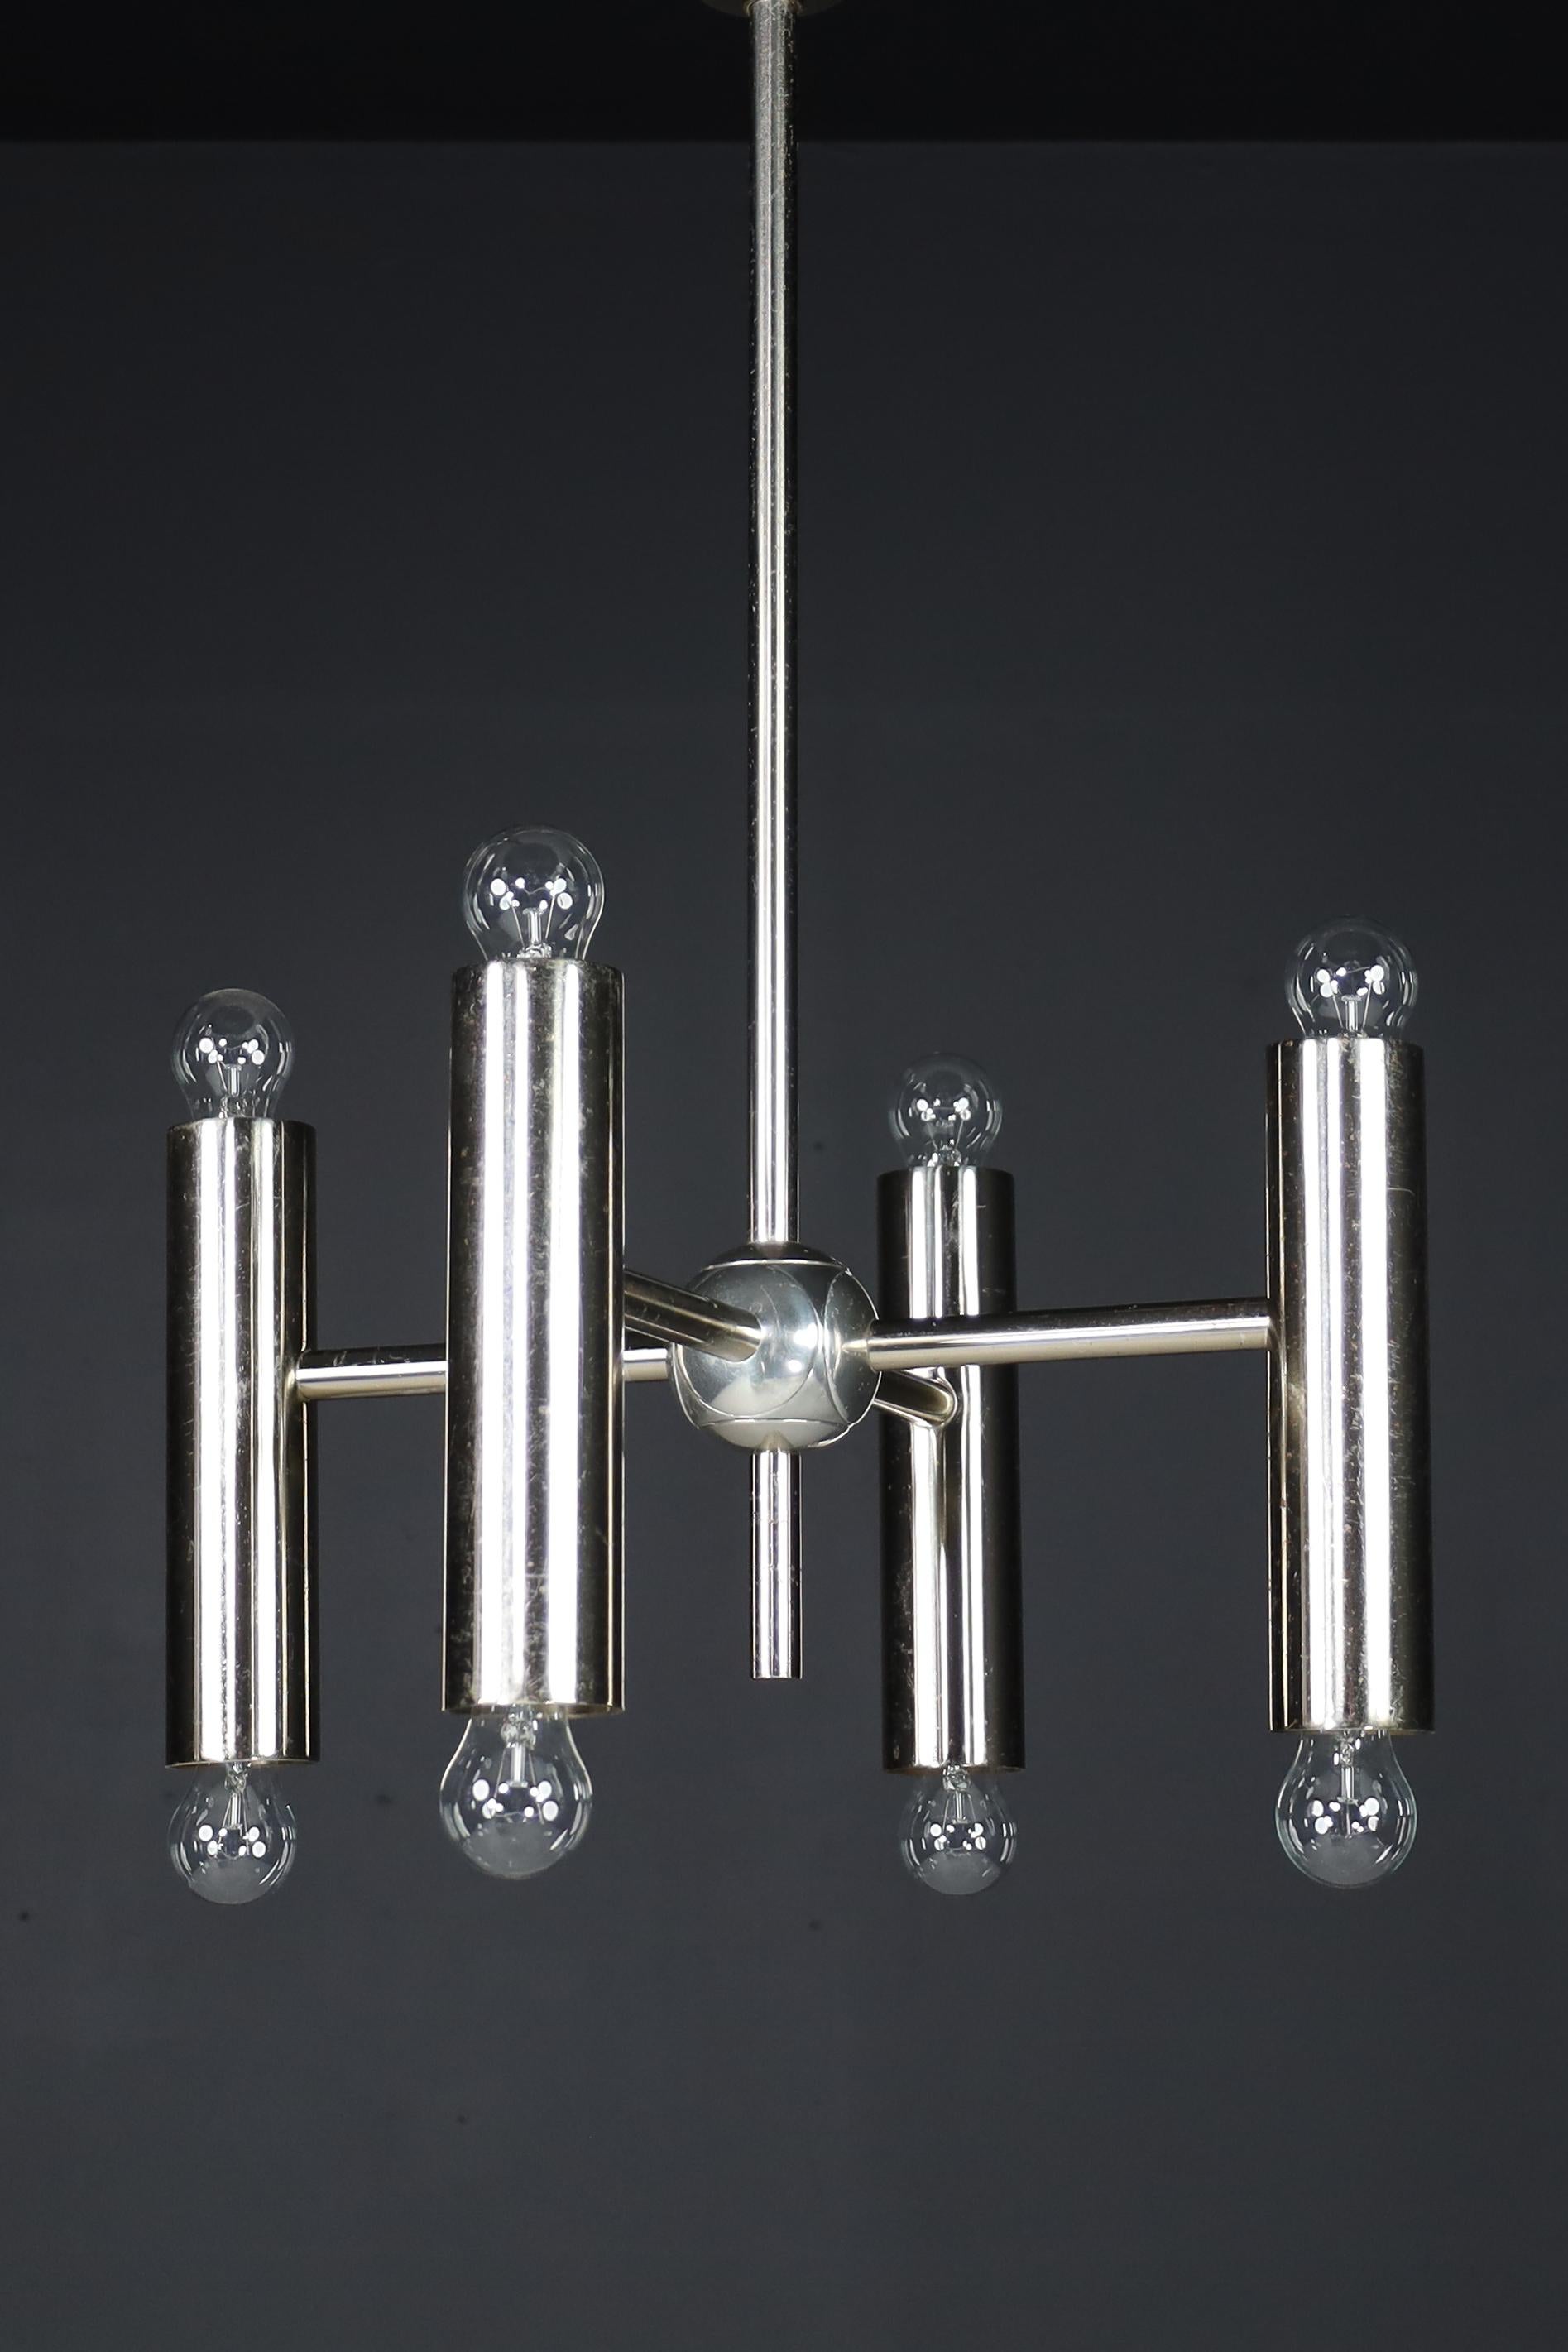 1 of 6 Minimalistic Design Geometric Chandeliers in Chrome, Germany, 1970s For Sale 4